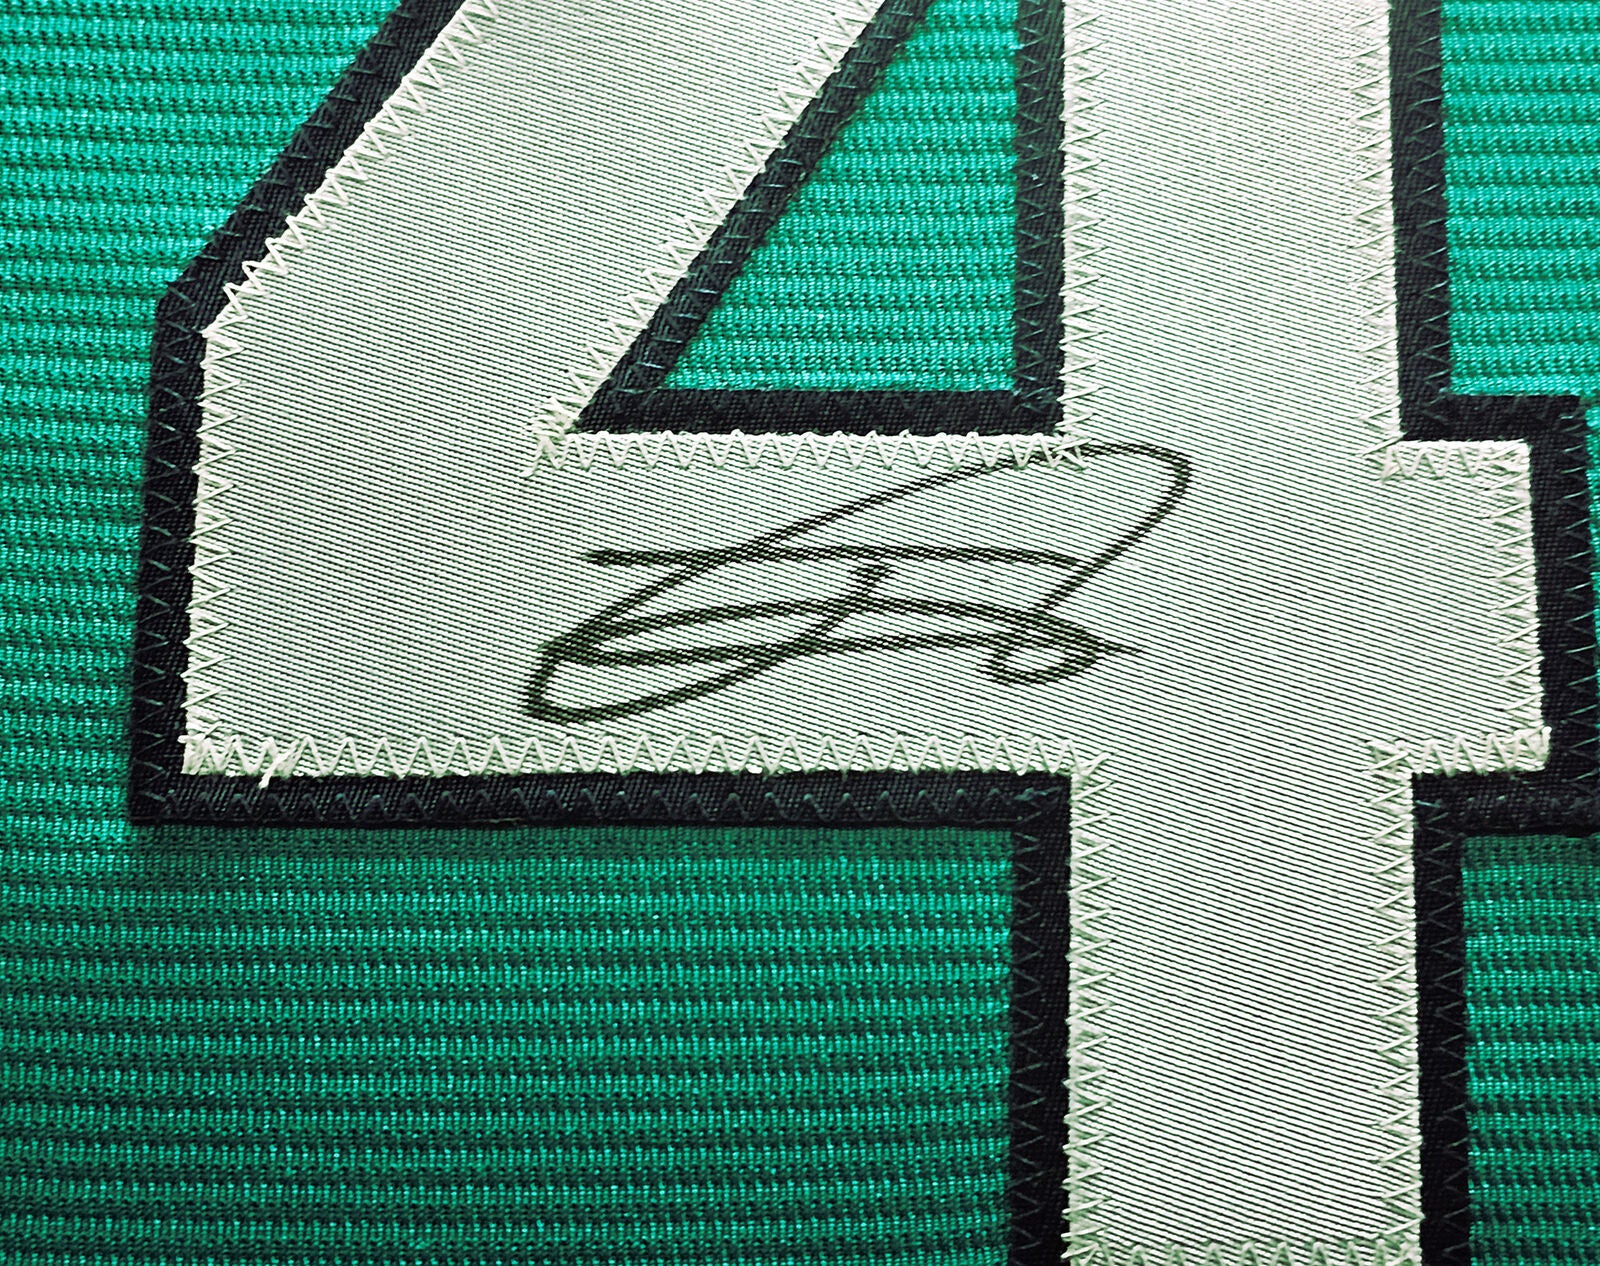 Framed Julio Rodriguez Seattle Mariners Autographed Green Nike Replica  Jersey